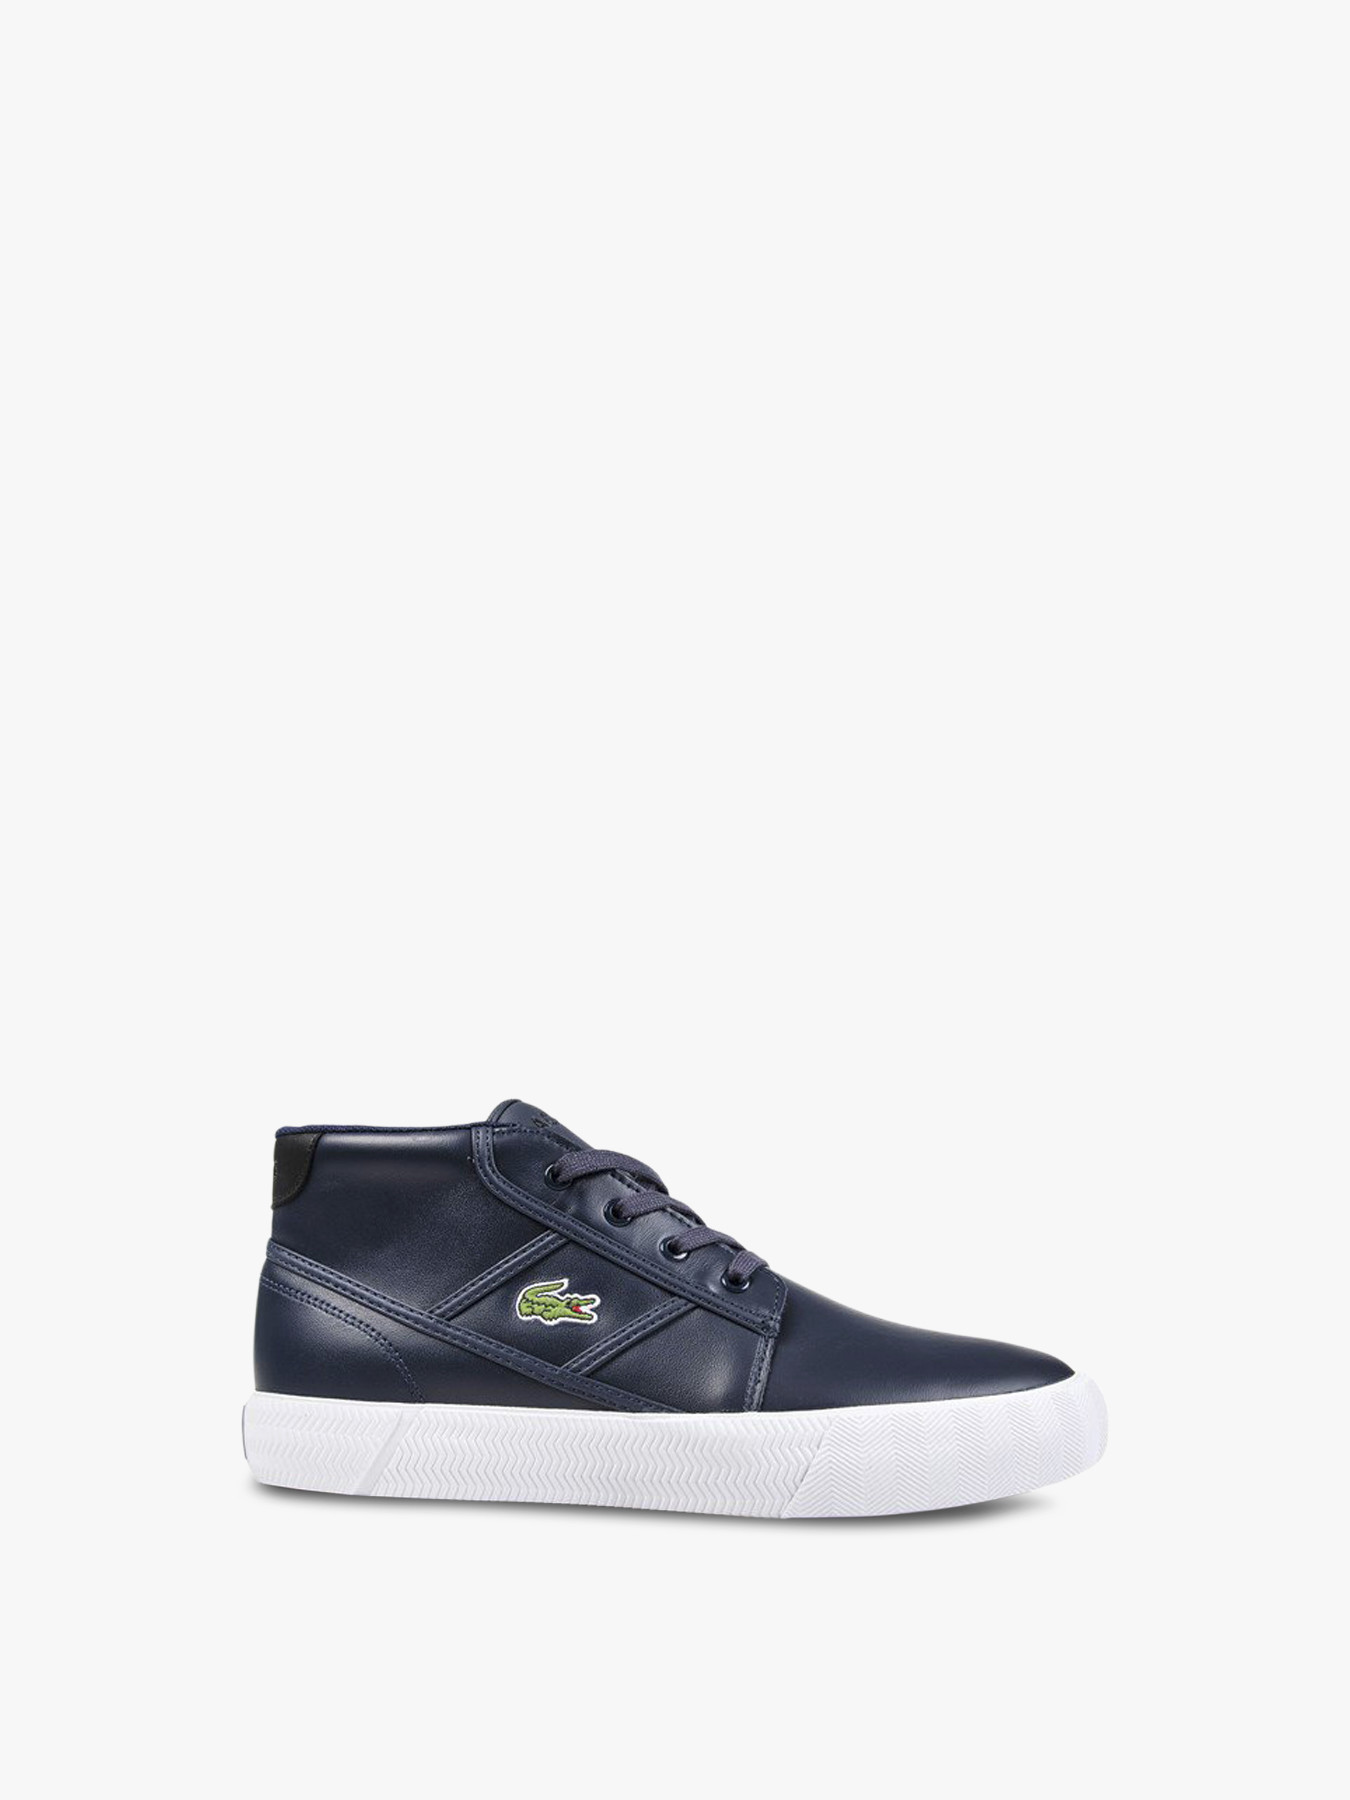 Men's Lacoste LACOSTE Gripshot Chukka Trainers | Sports Trainers | Fenwick